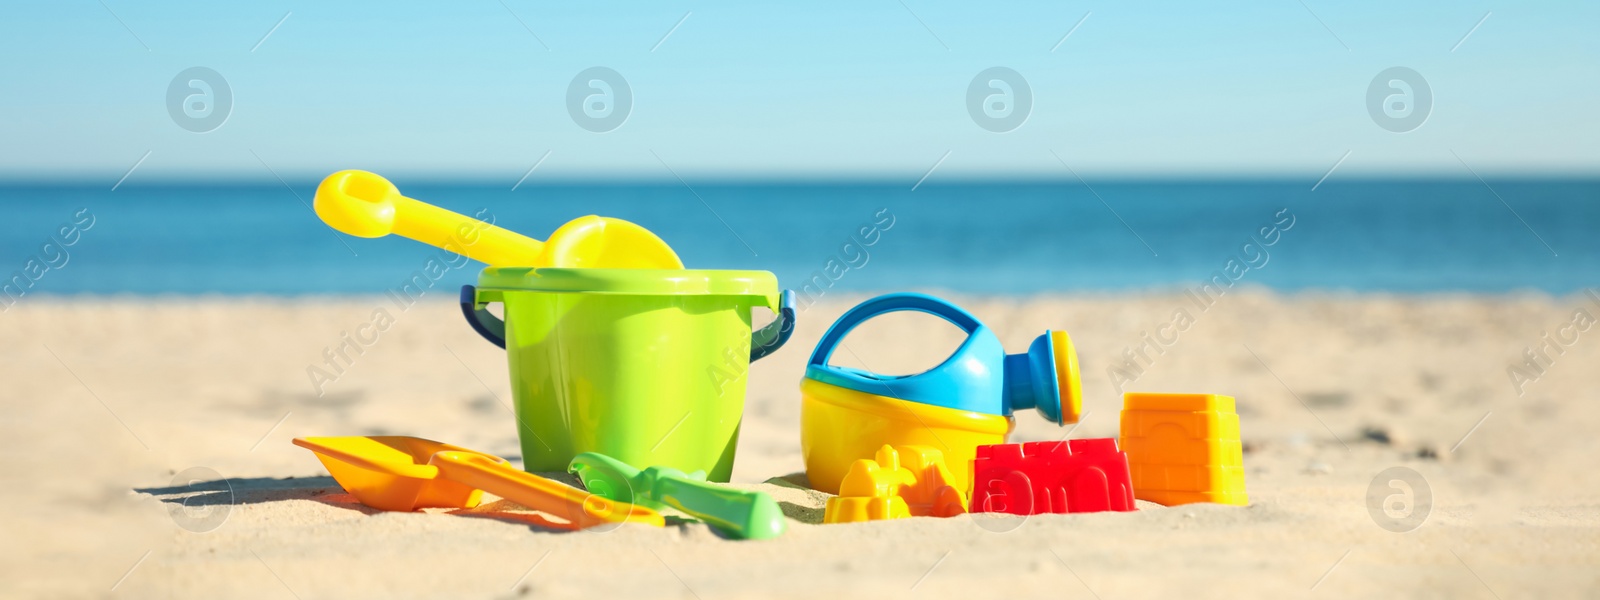 Image of Different child plastic toys on sandy beach. Banner design